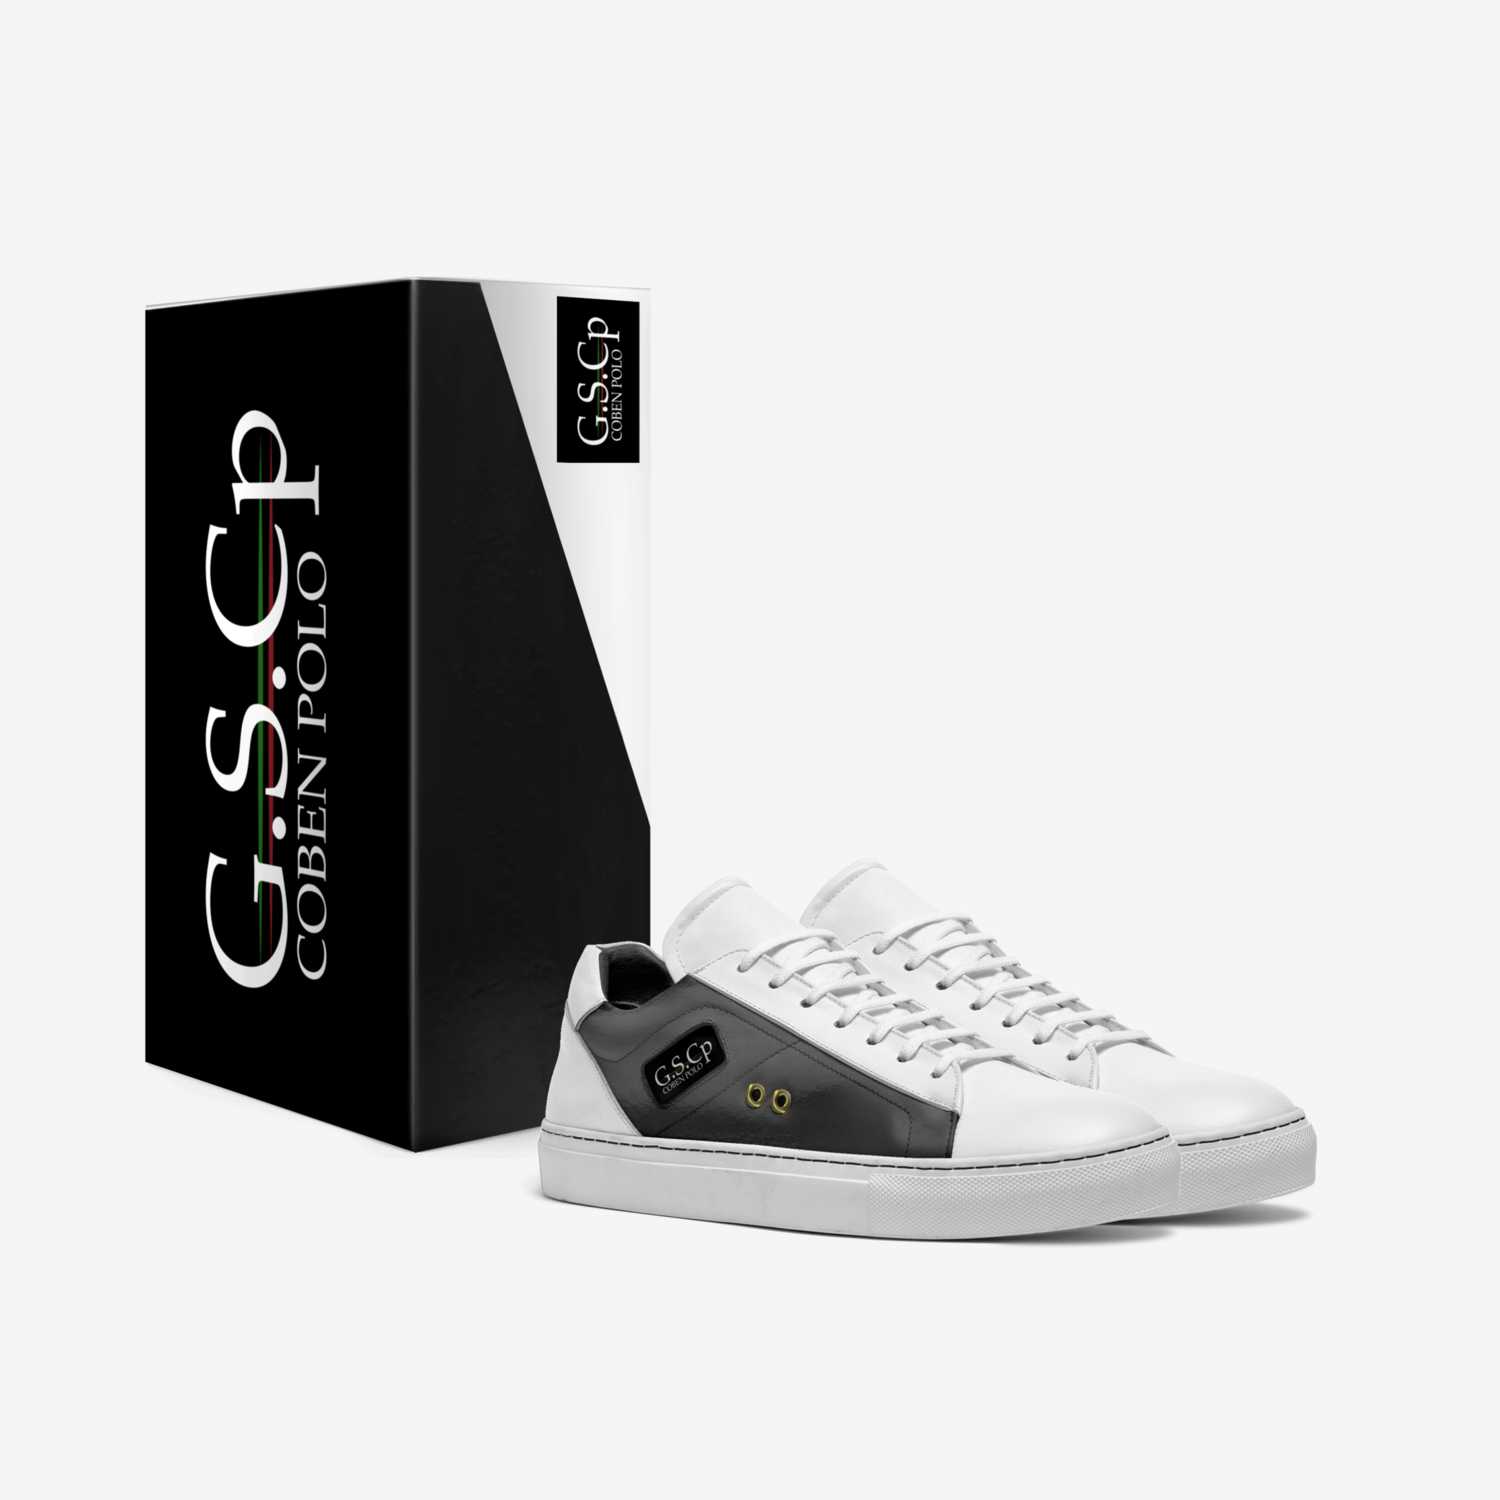 GIO custom made in Italy shoes by Costa Cobenpolo | Box view